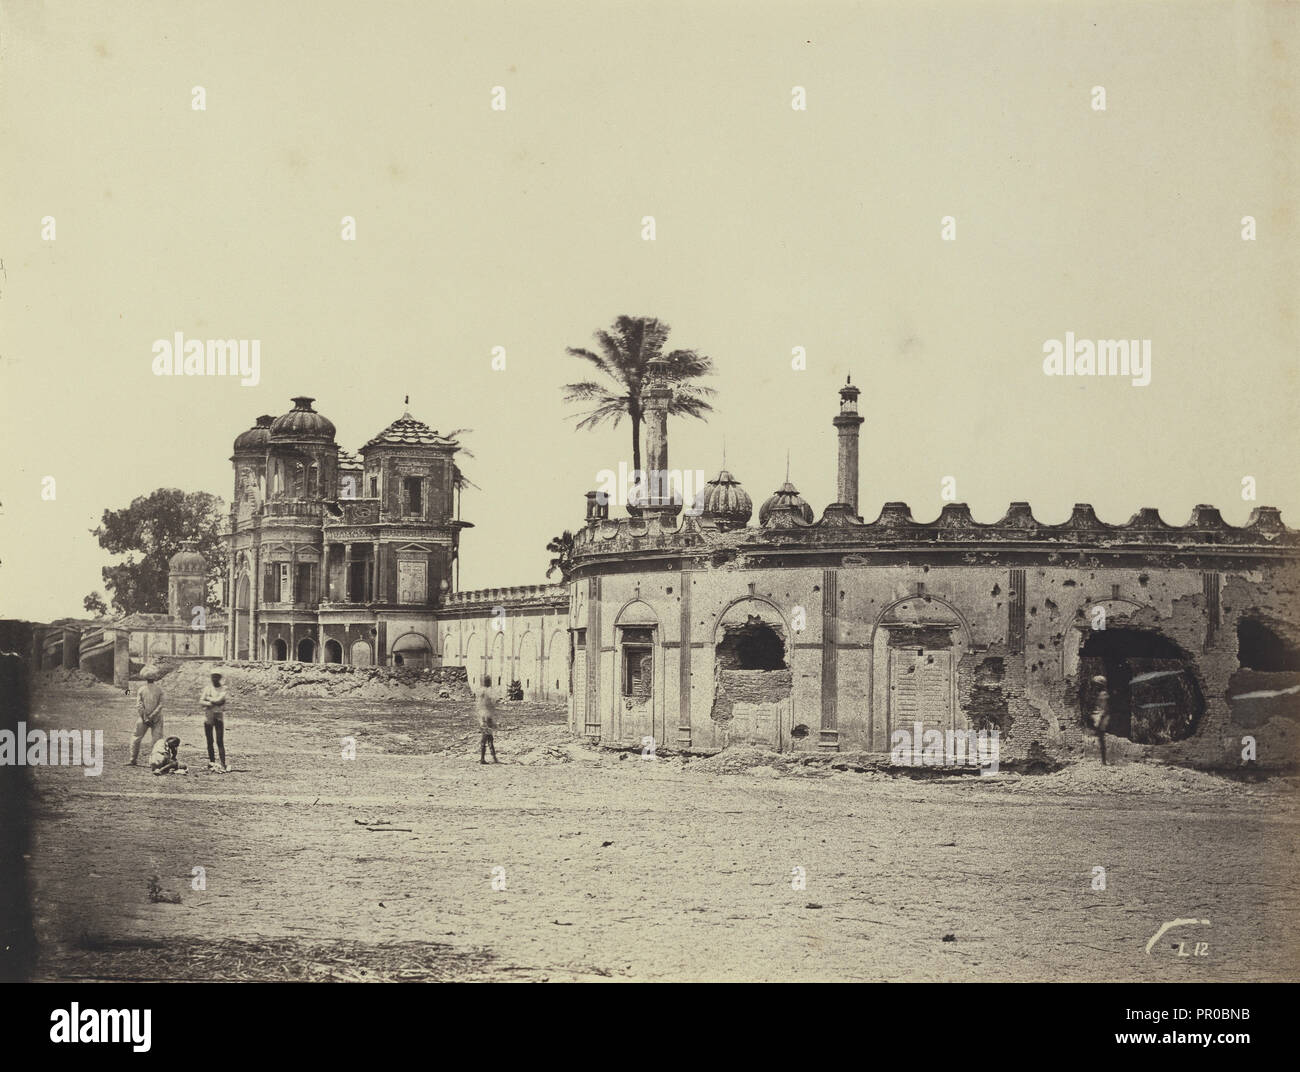 The Secundrabagh; Felice Beato, 1832 - 1909, Henry Hering, 1814 - 1893, India; 1858 - 1862 Stock Photo